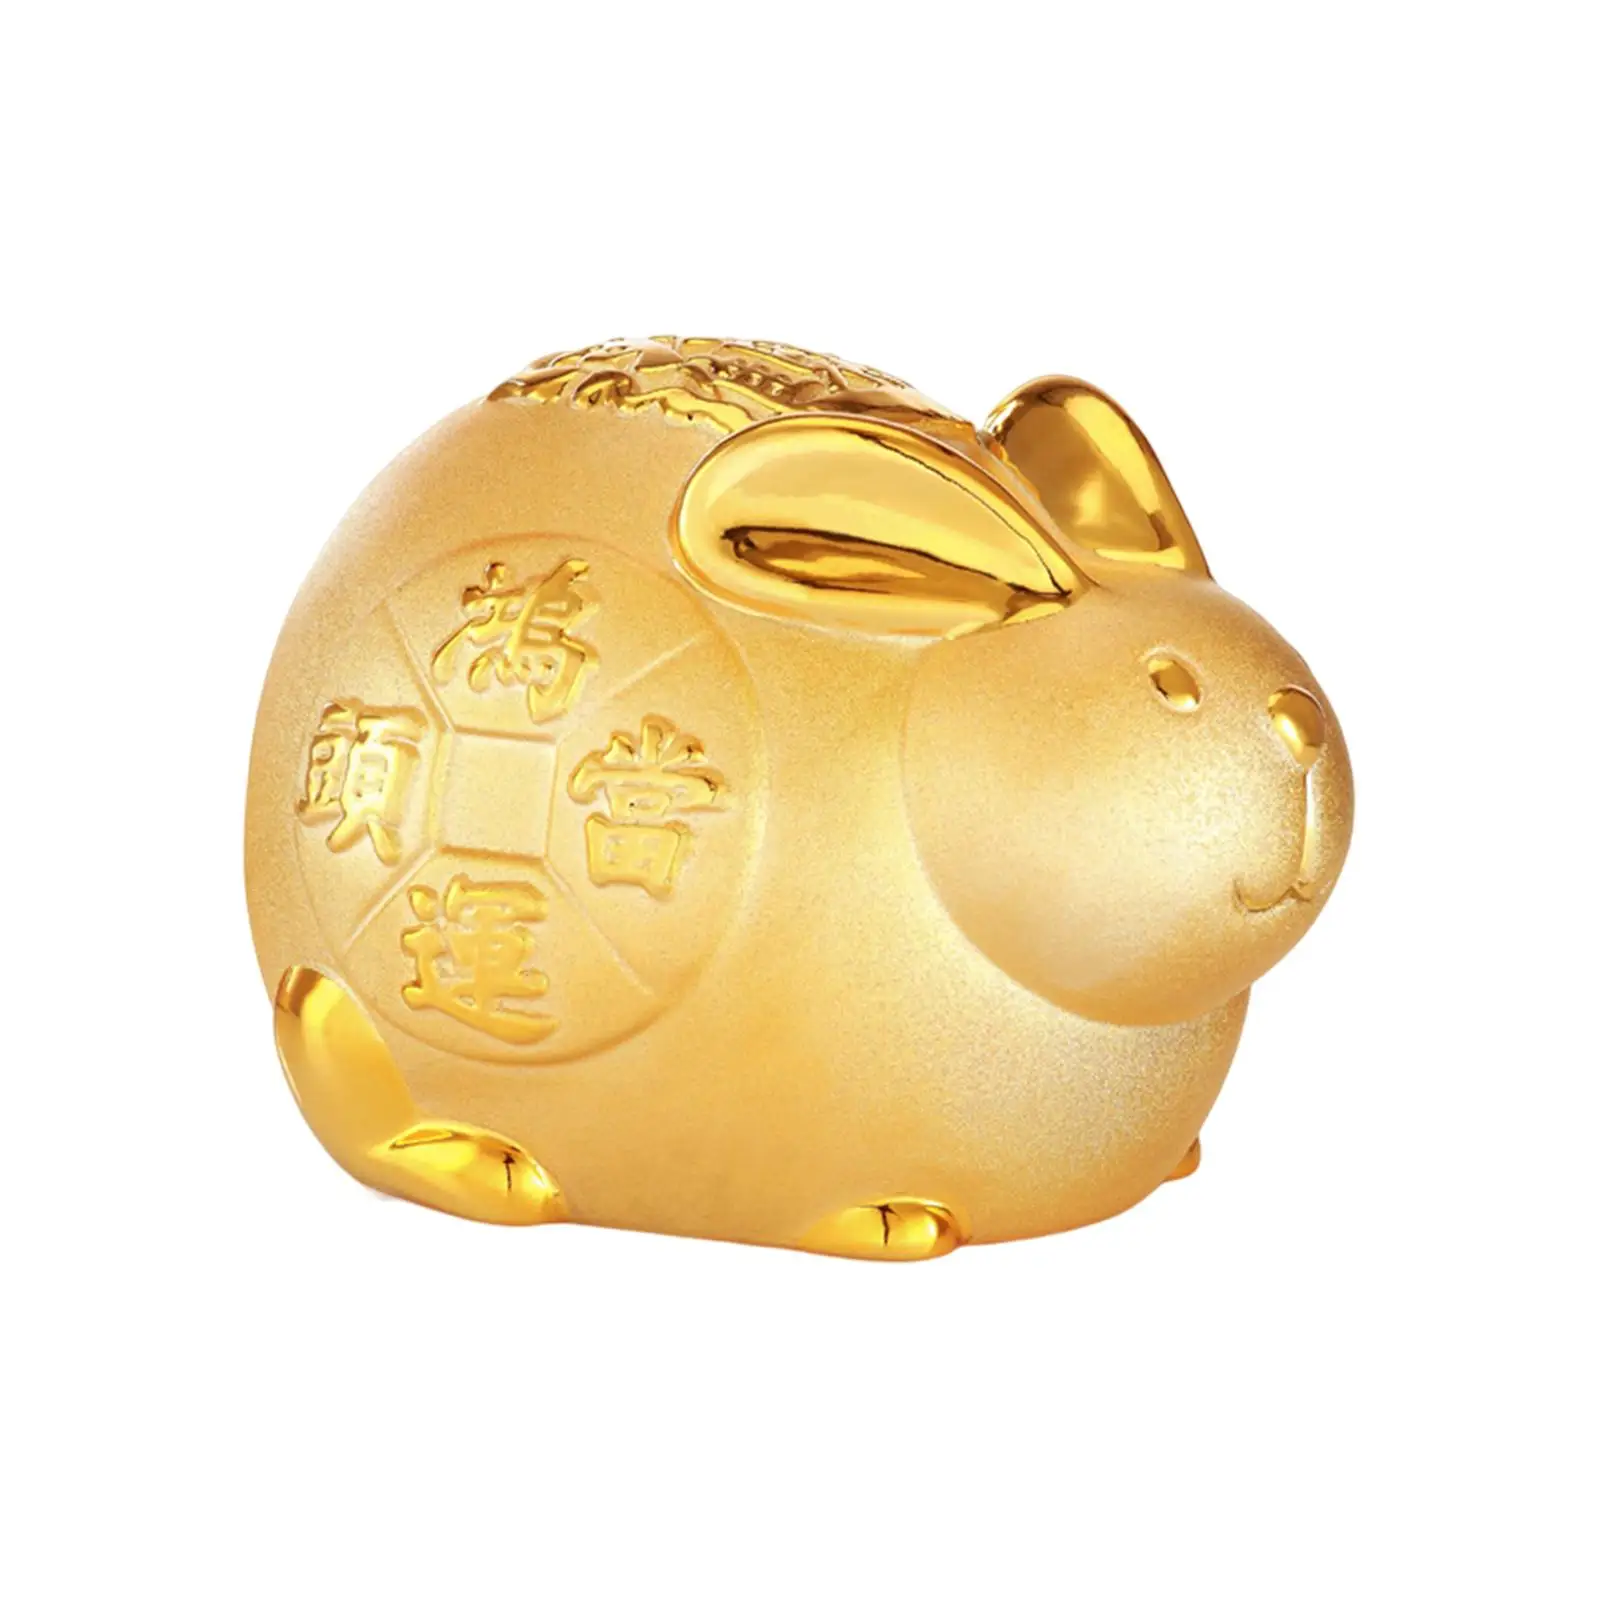 Lucky Rabbit Money Bank Animal Figurines Change Container Ornaments Bunny Statue for Children`s Bedroom Home Decoration